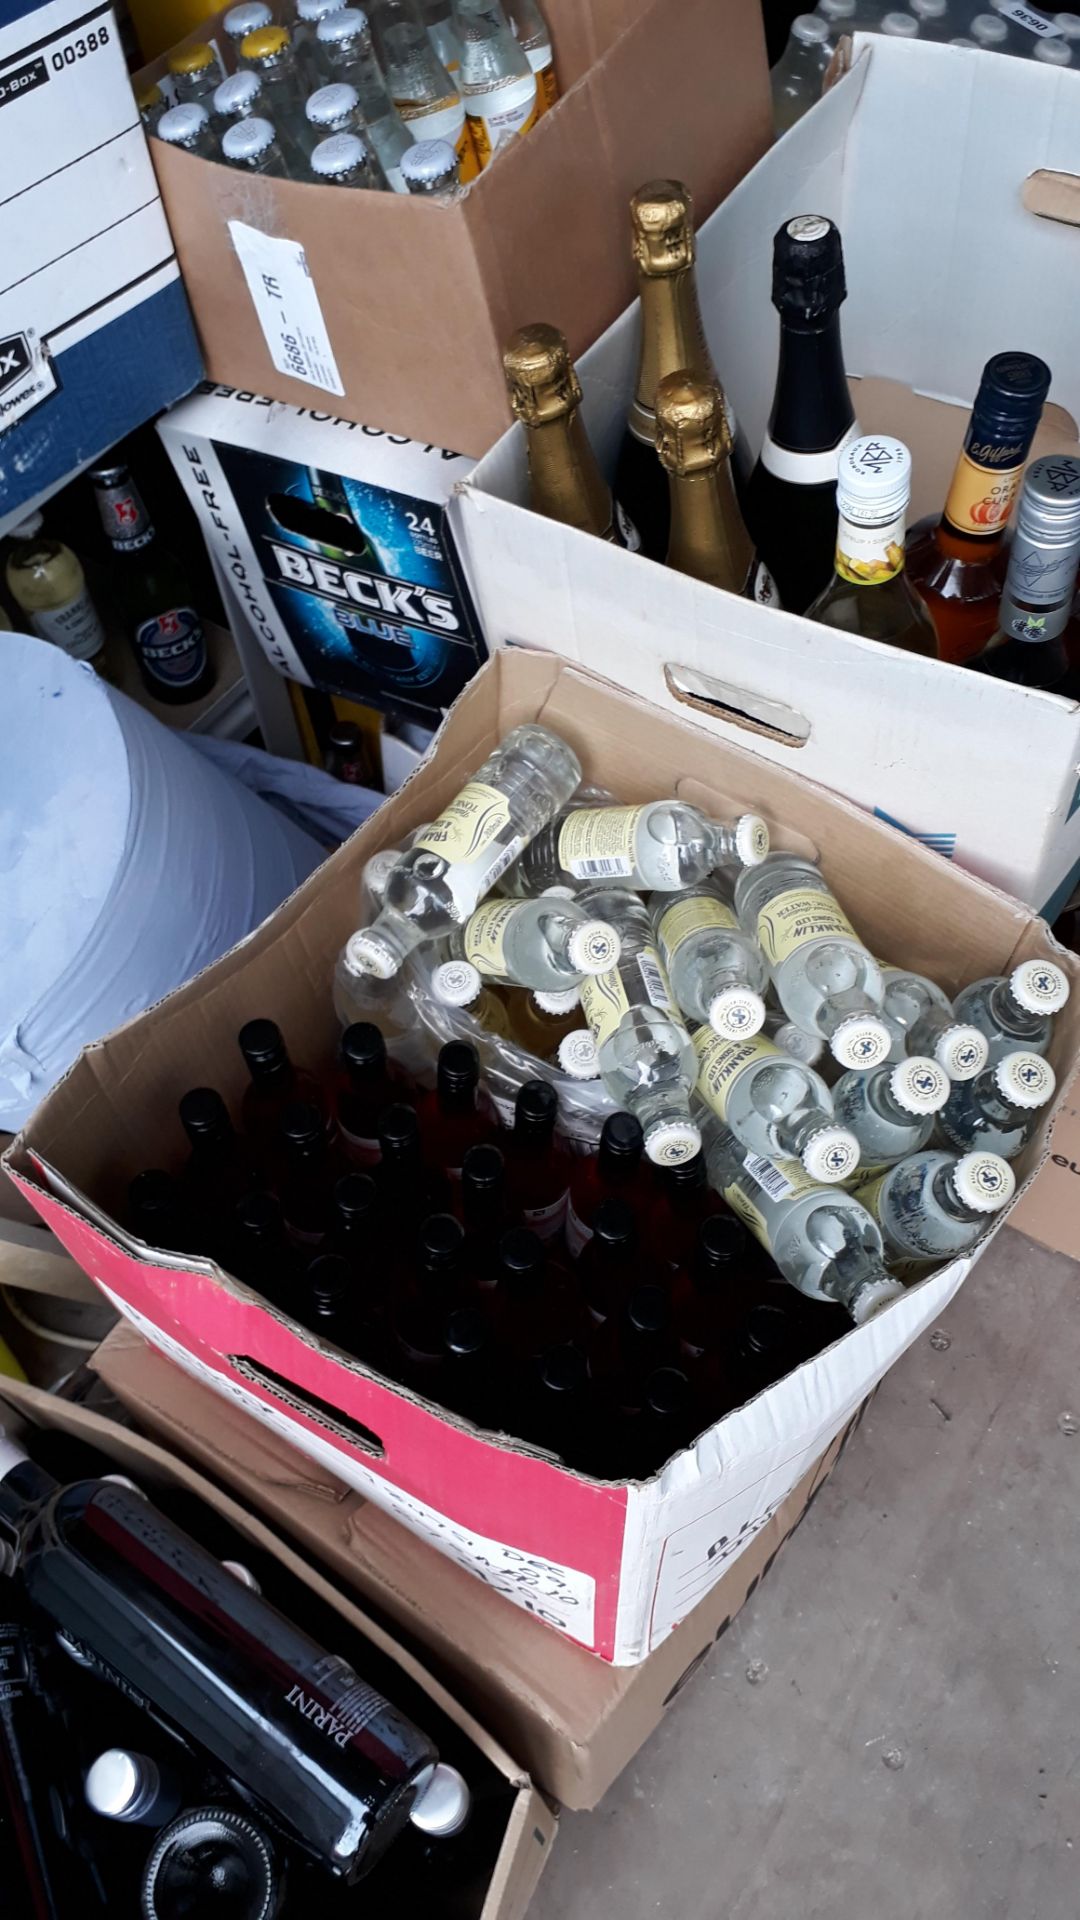 Large Quantity of Alcohol and Beverage Stock - Image 108 of 117